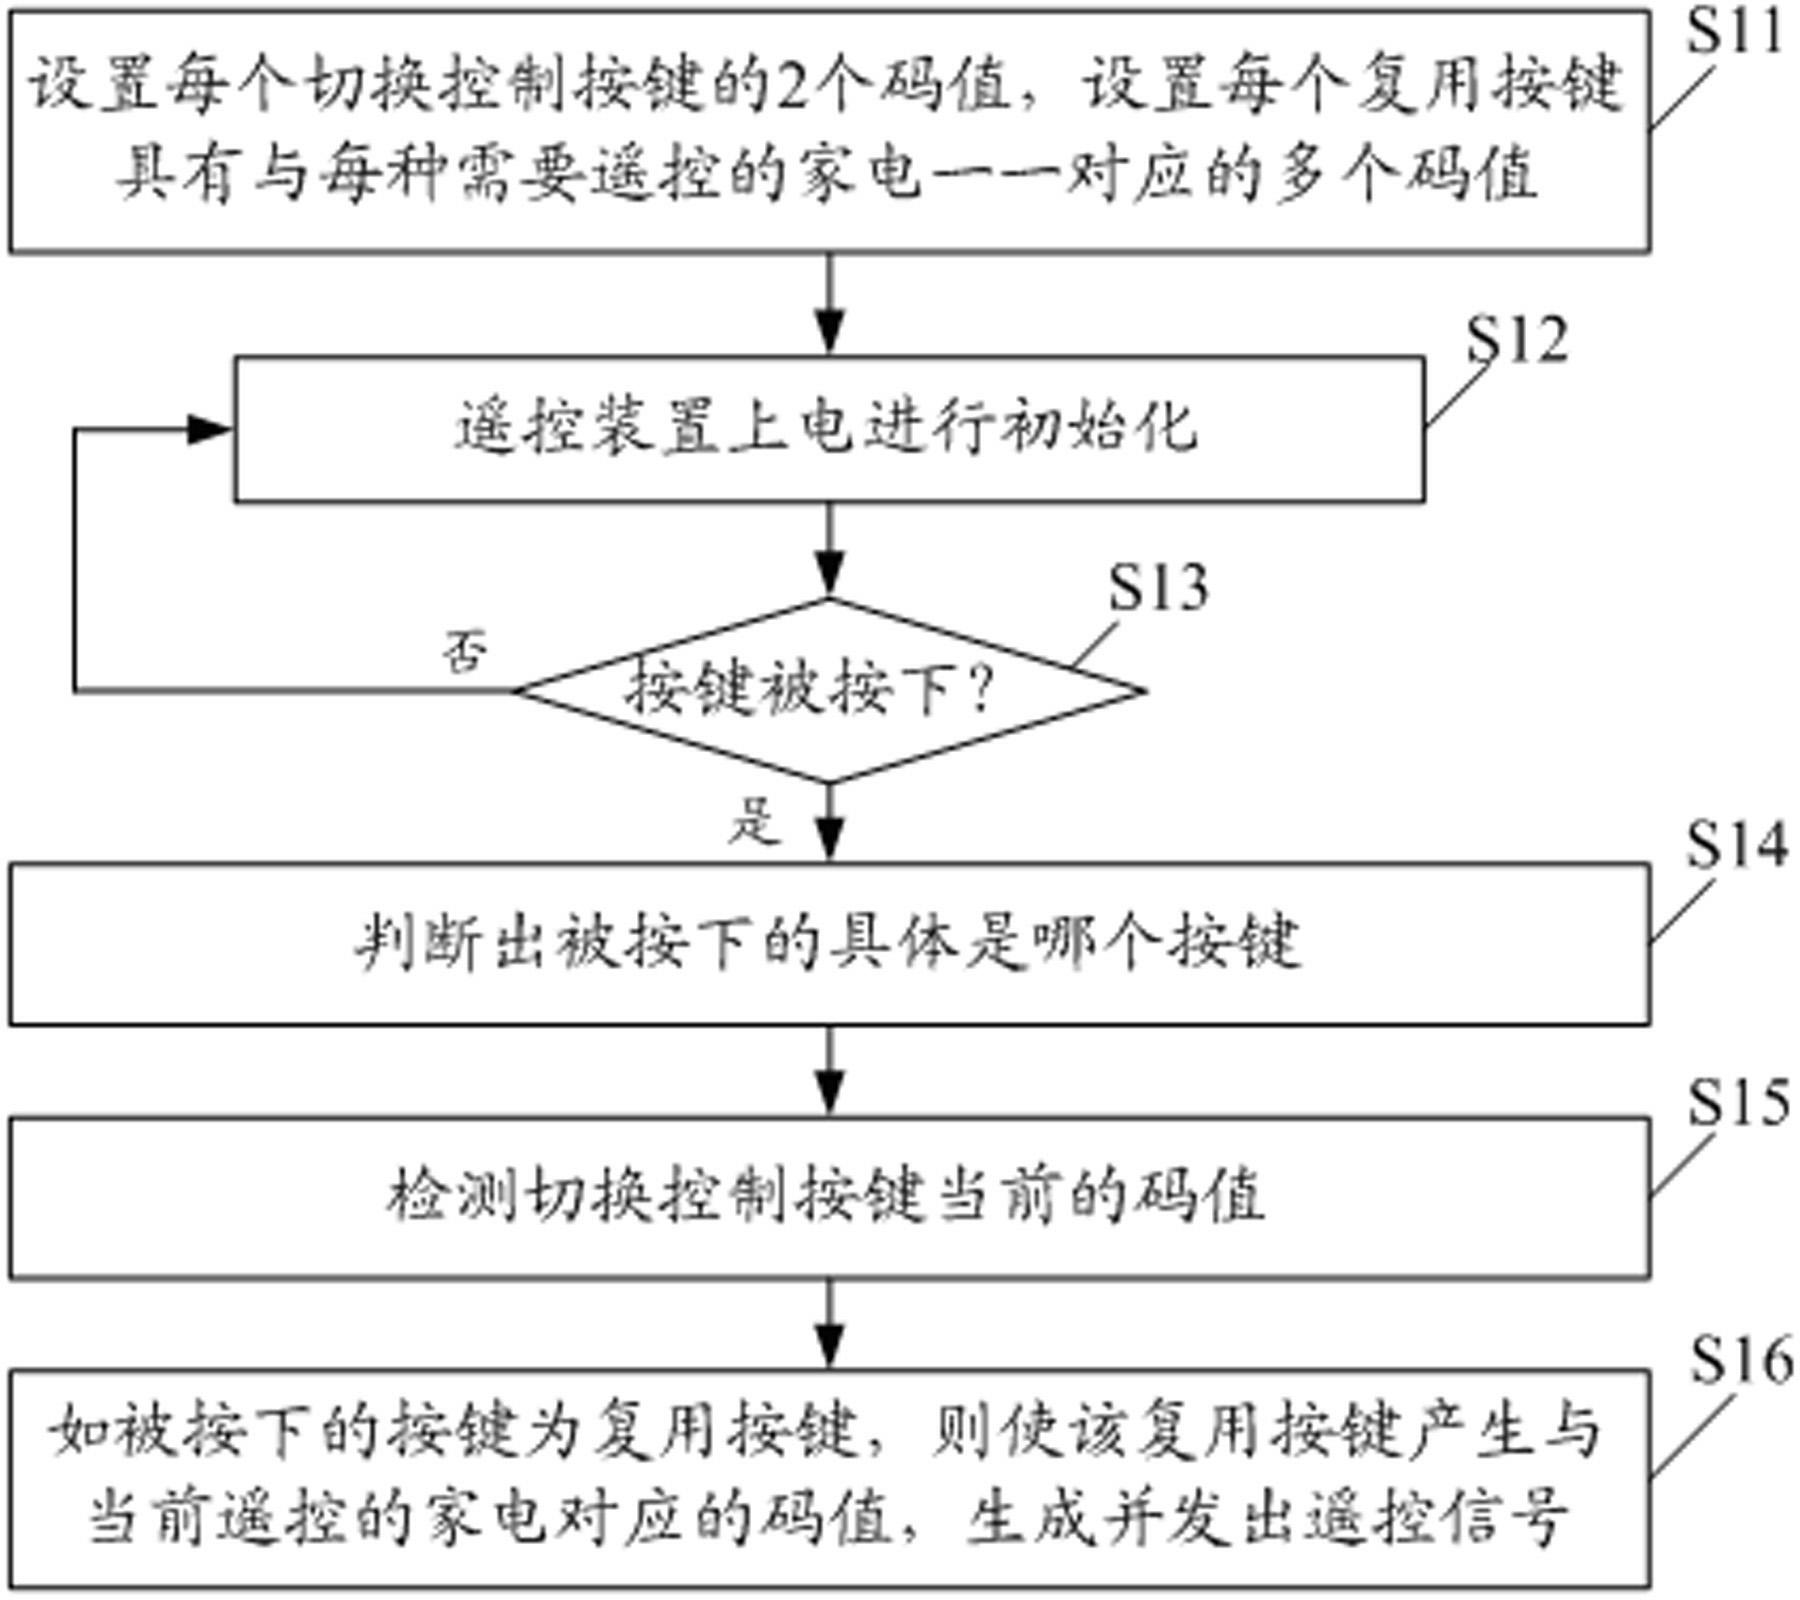 All-in-one remote control device of household electrical appliances and realization method thereof